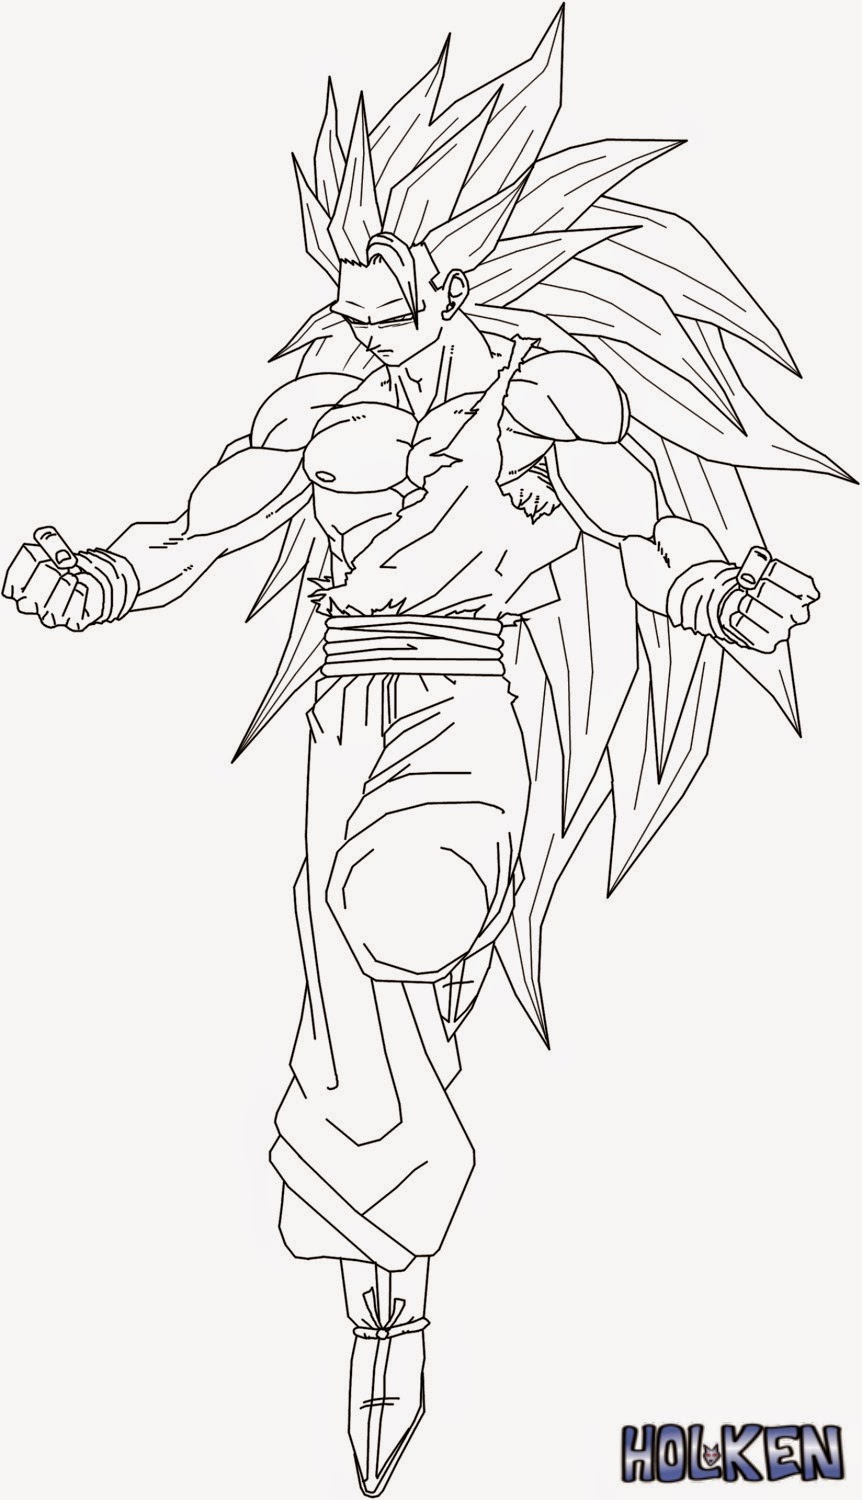 All in One..The best: Goku sketch for Colouring